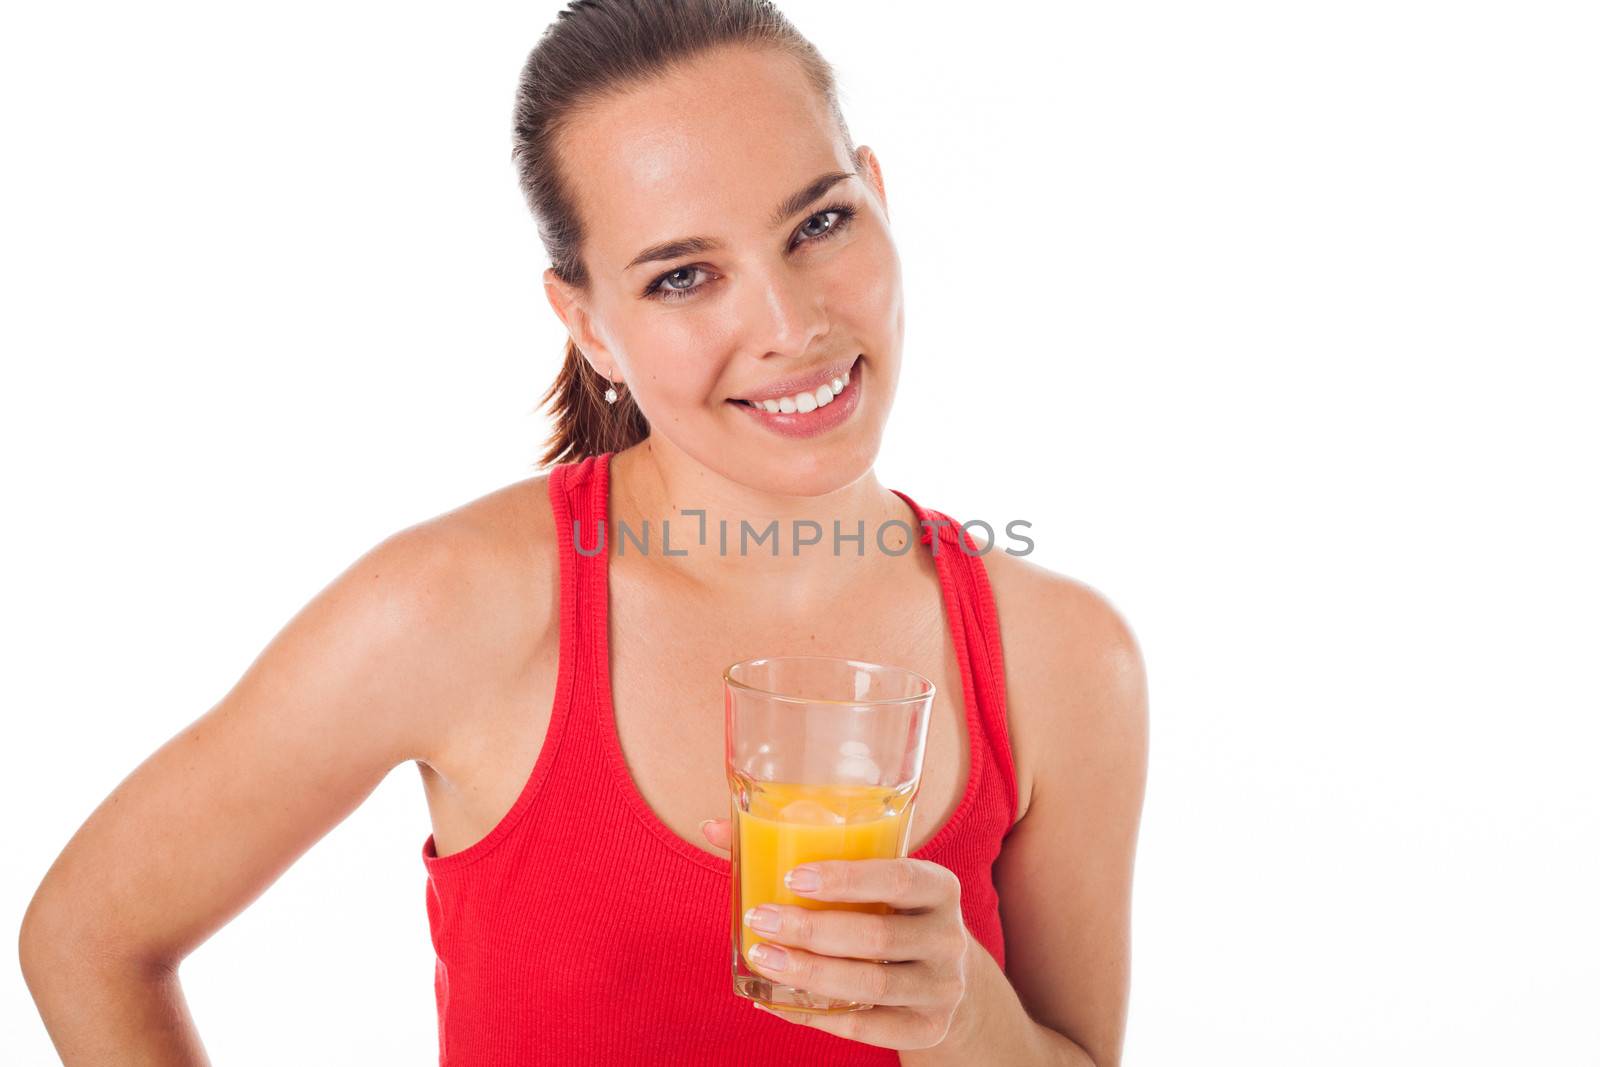 Portrait of a woman drinking an orange juice and smiling, isolated on white